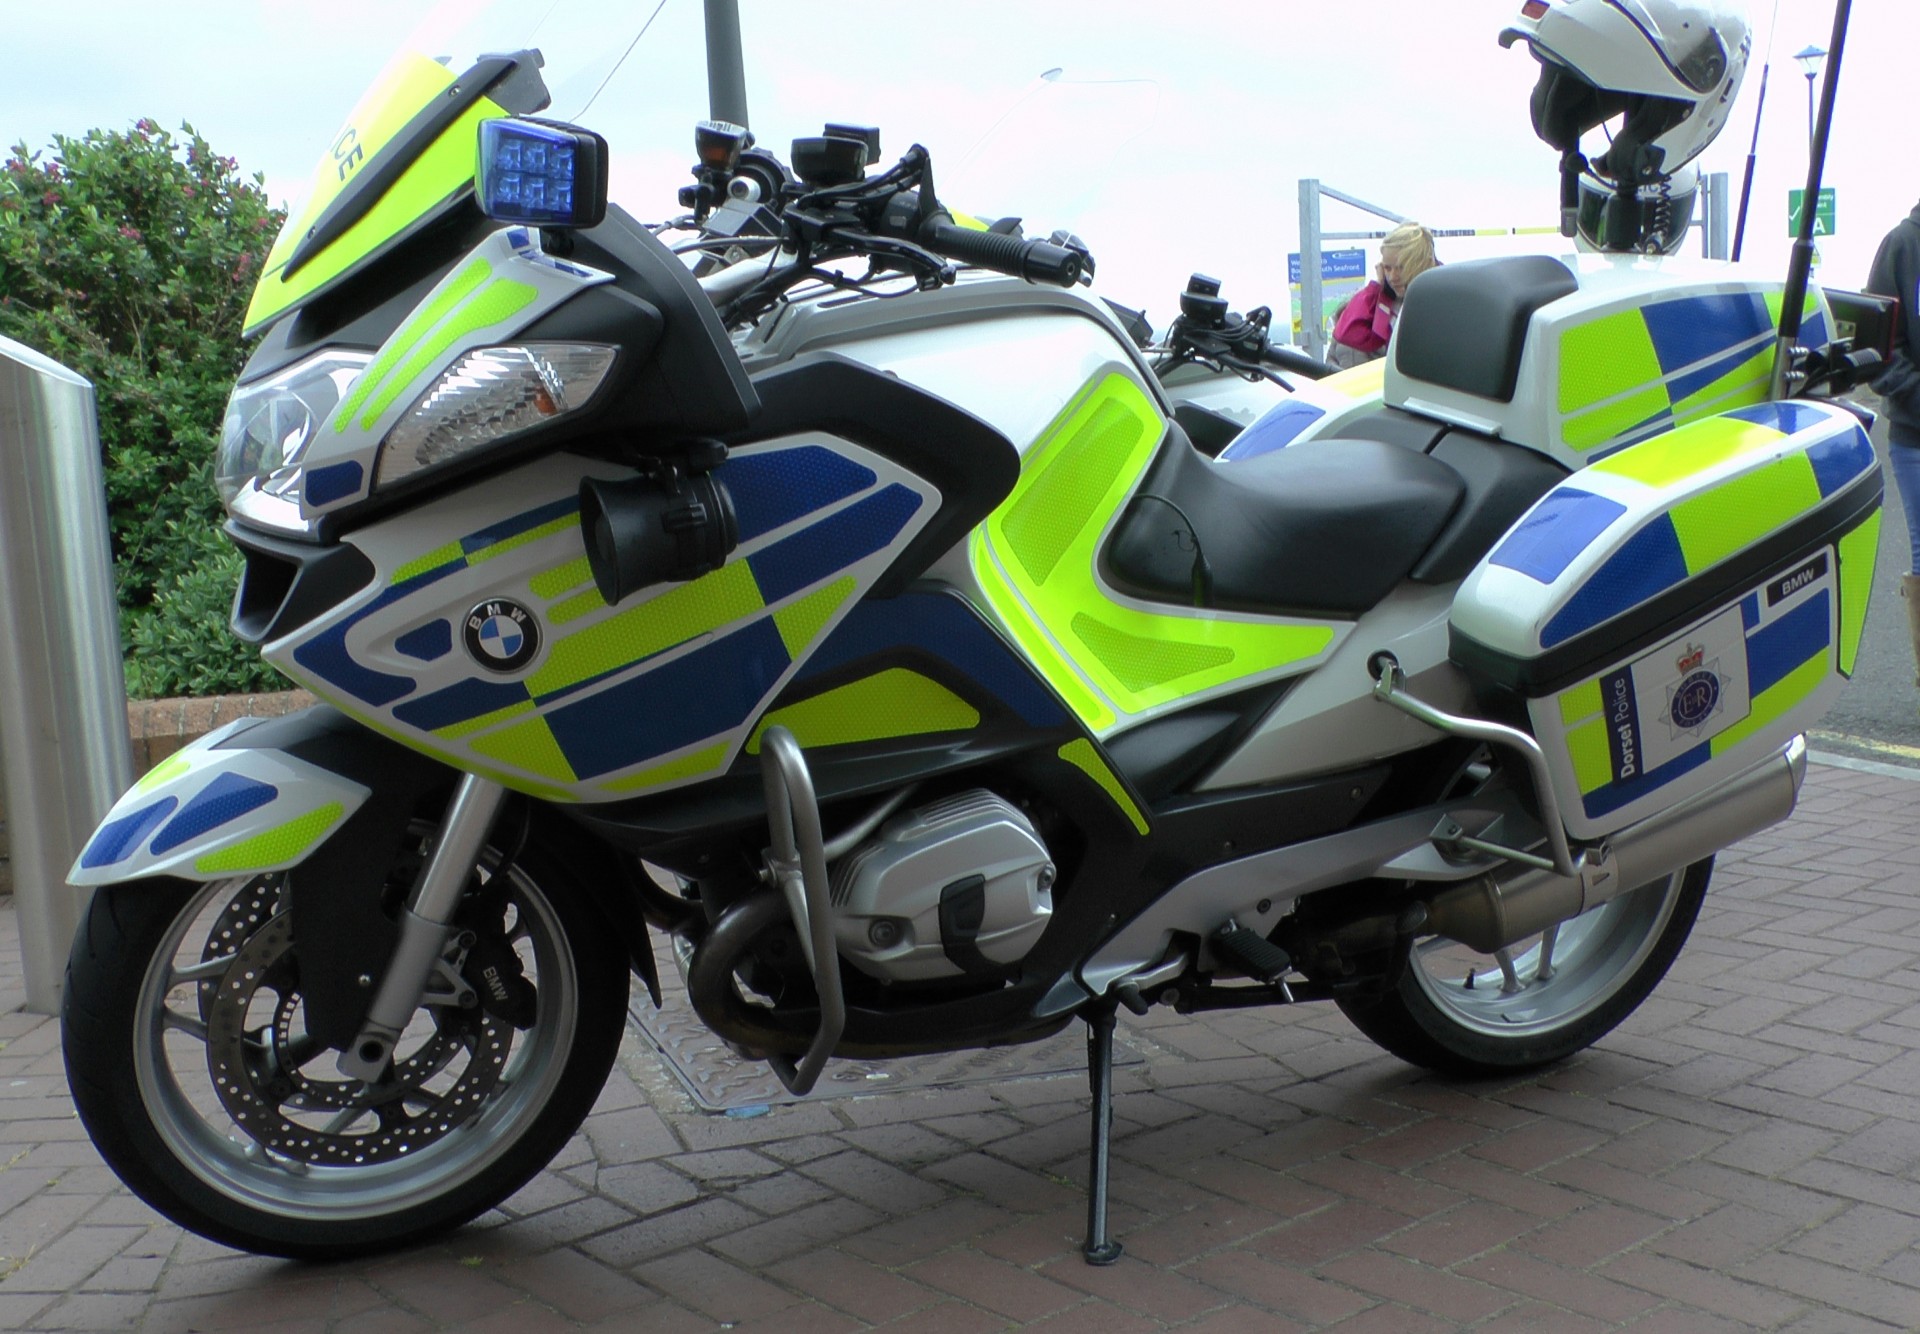 Police BMW Motorcycle